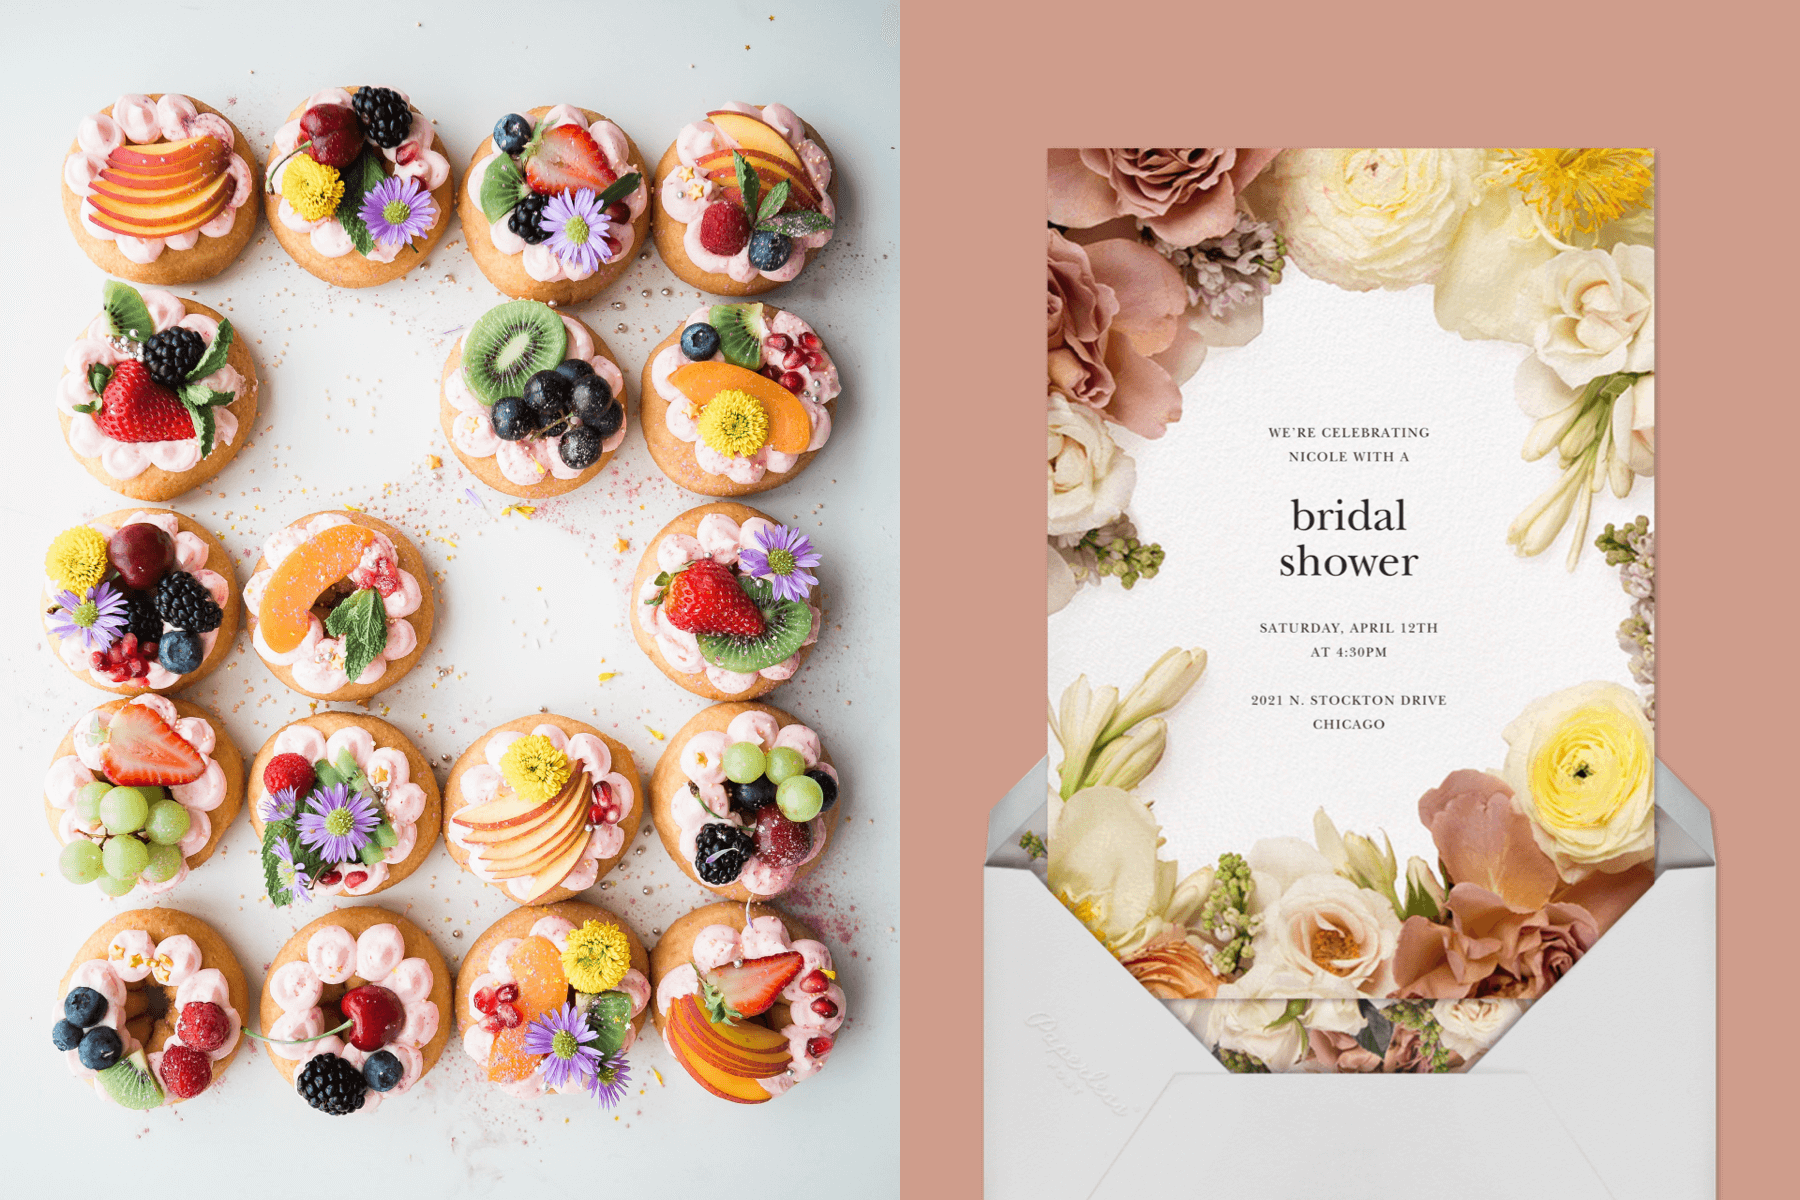 left: Dessert doughnuts decorated with cream, fruit, and flowers. Right: A bridal shower invitation with a border of large photographed flowers.